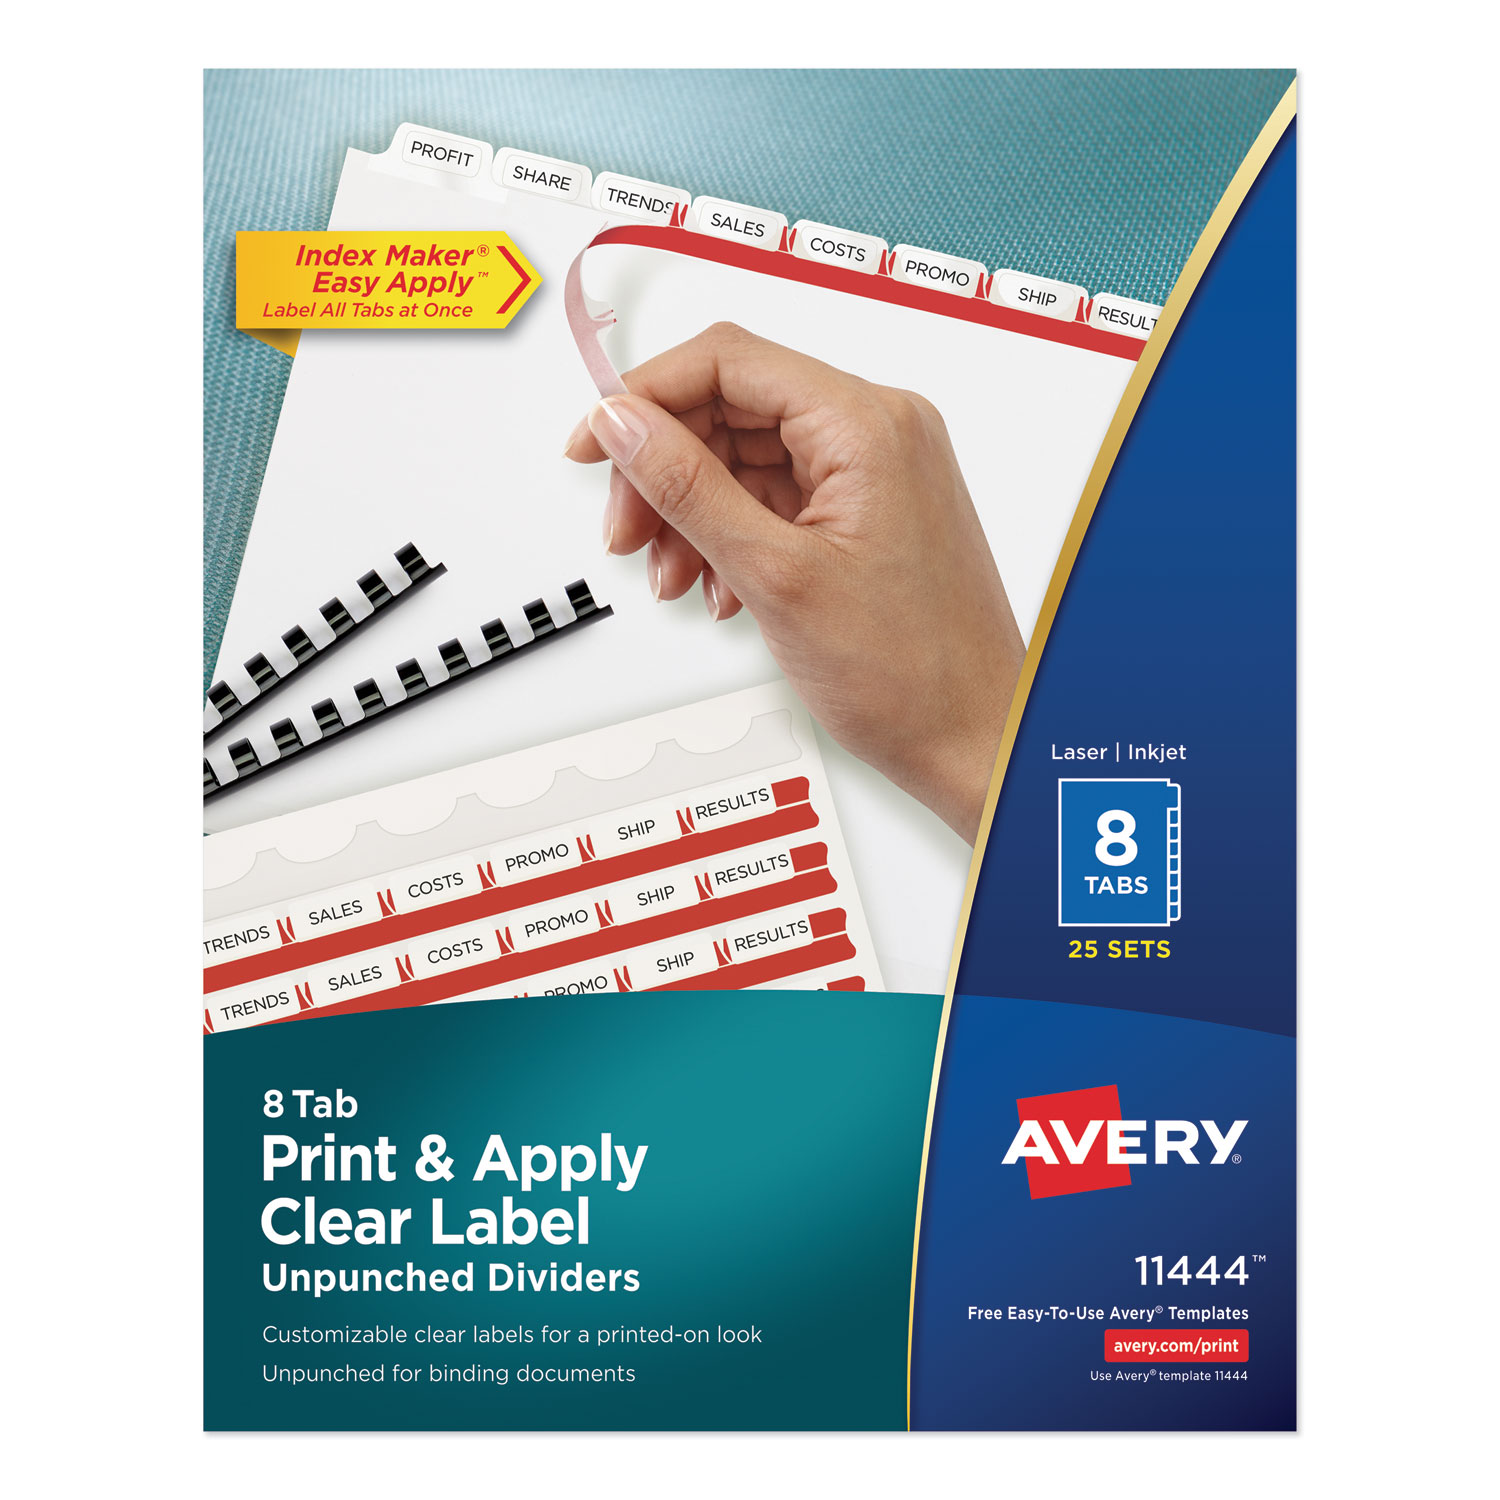  Avery 11444 Print and Apply Index Maker Clear Label Unpunched Dividers, 8-Tab, Ltr, 25 Sets (AVE11444) 